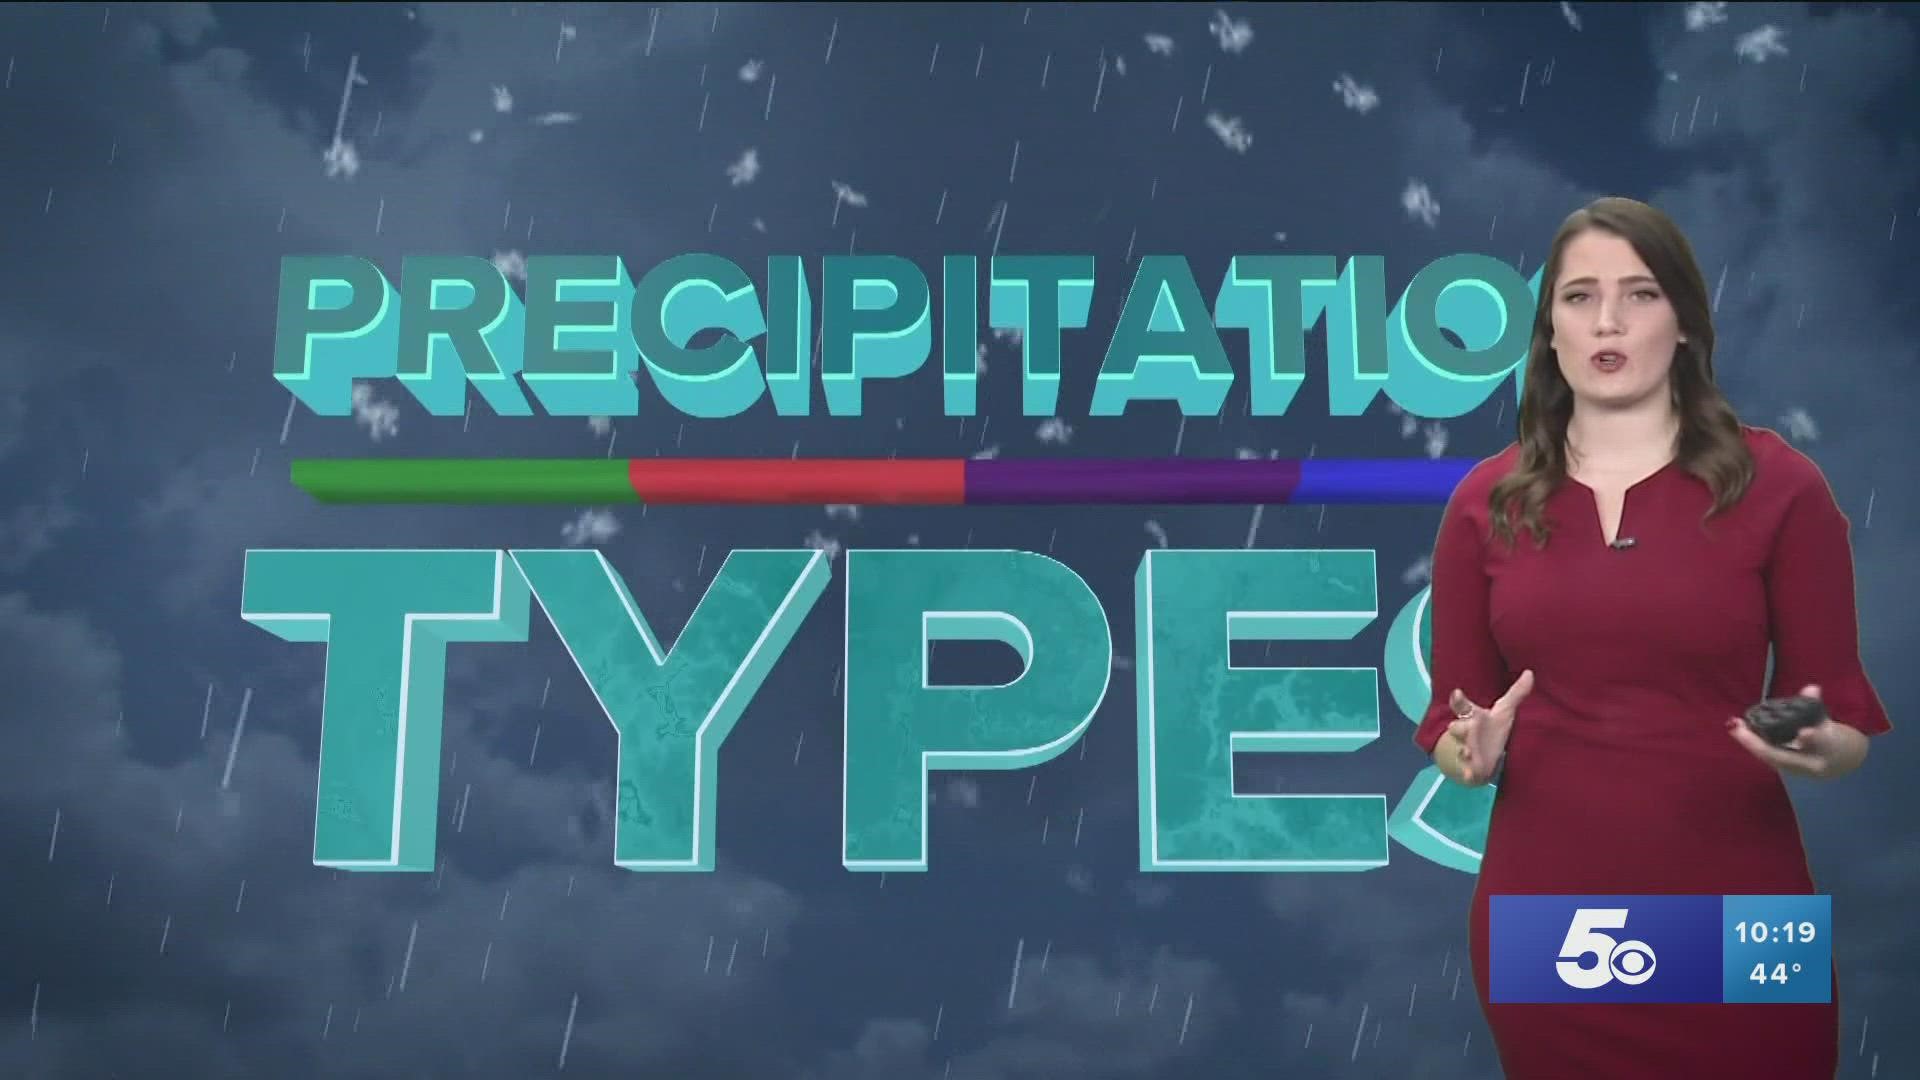 Meteorologist Michelle Trotter tells us about the four major winter precipitation types meteorologists forecast and how they form.